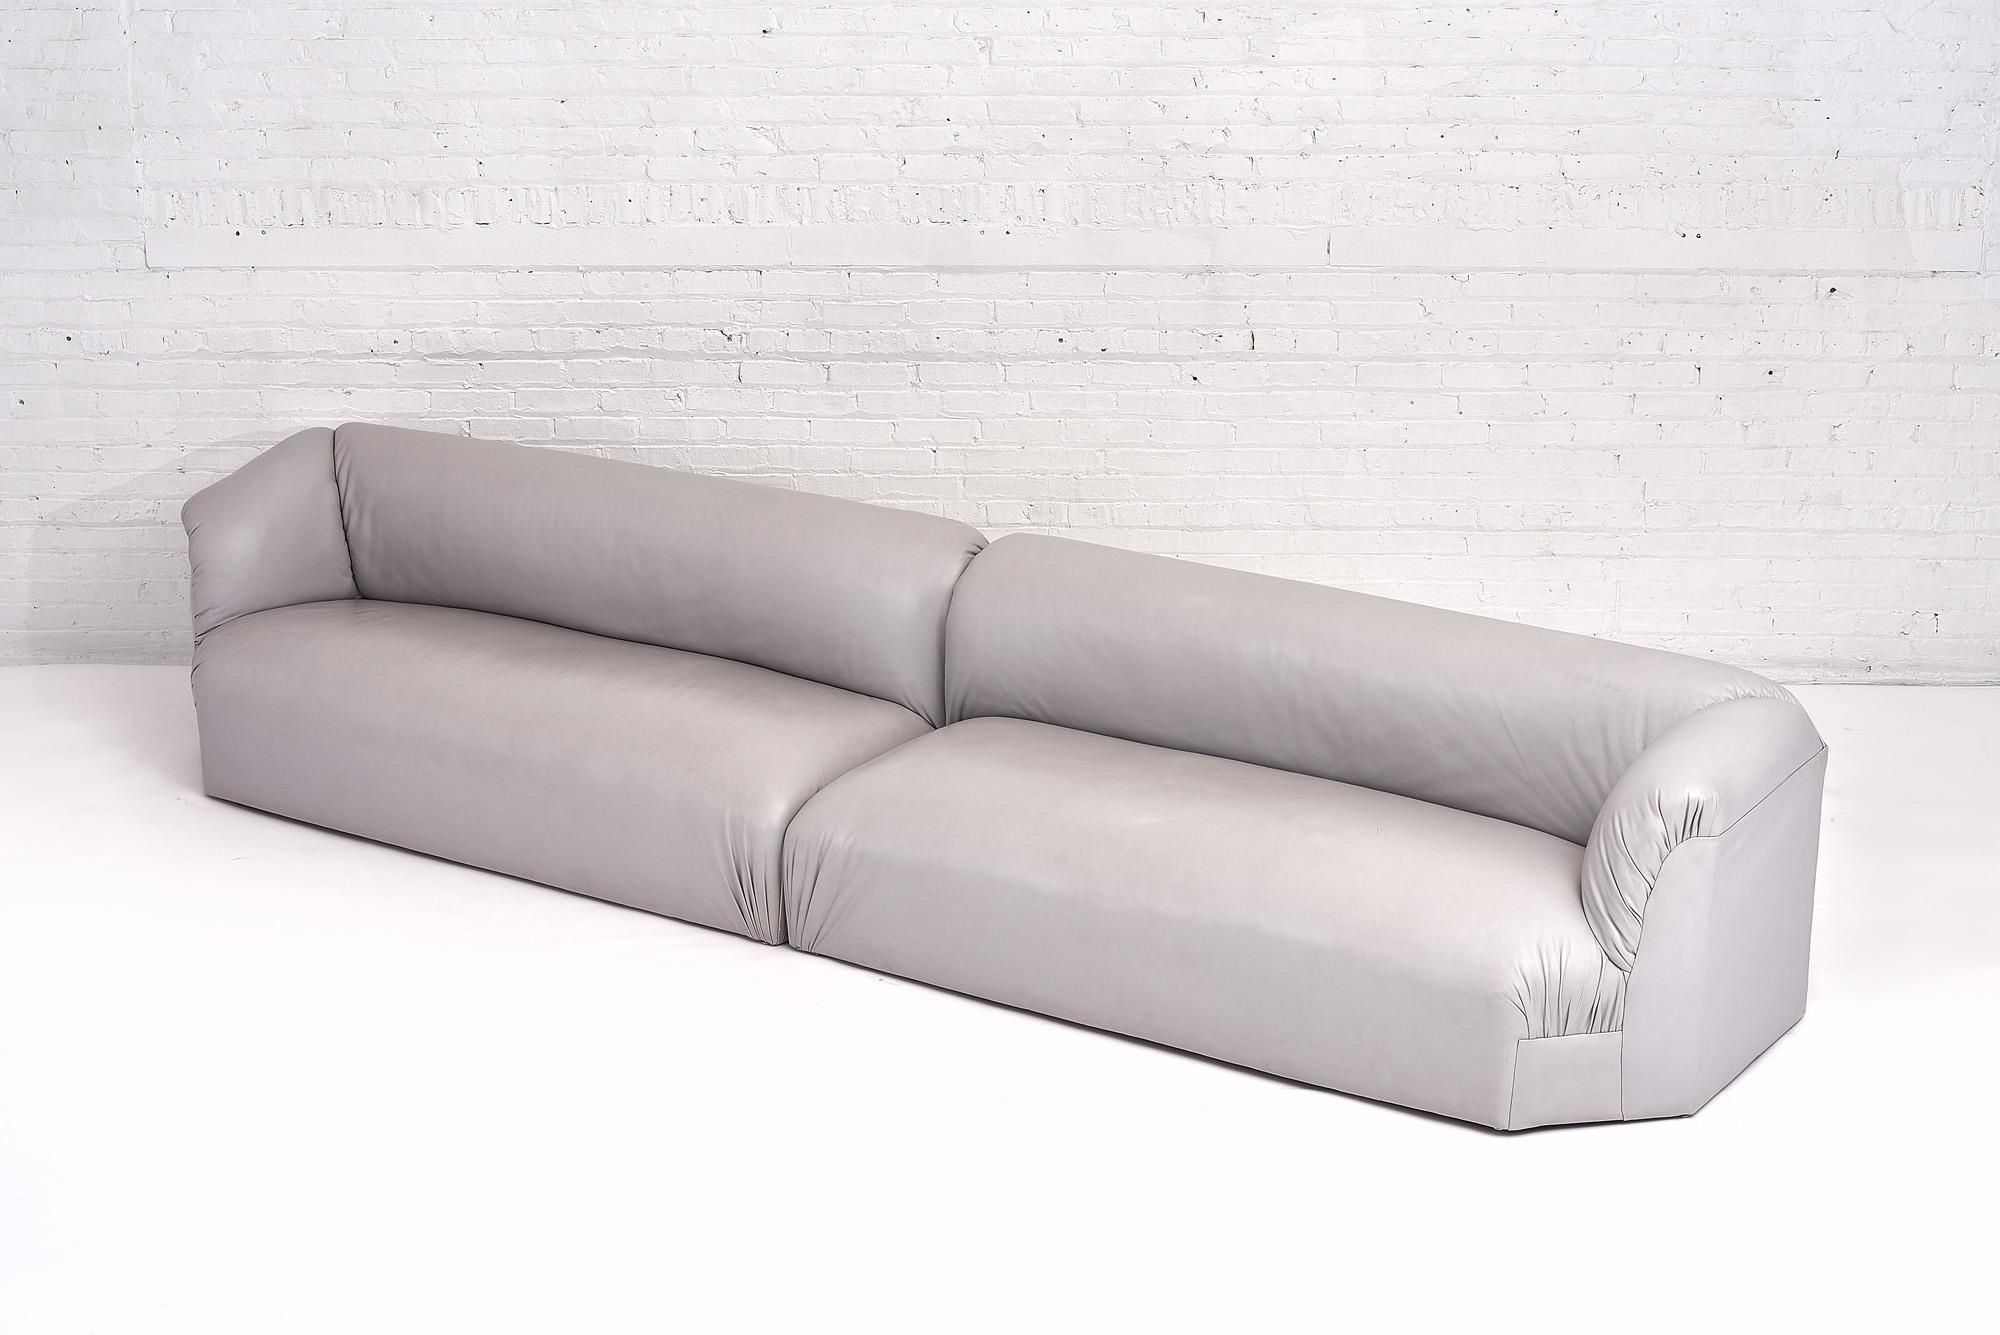 gray leather sectional couch